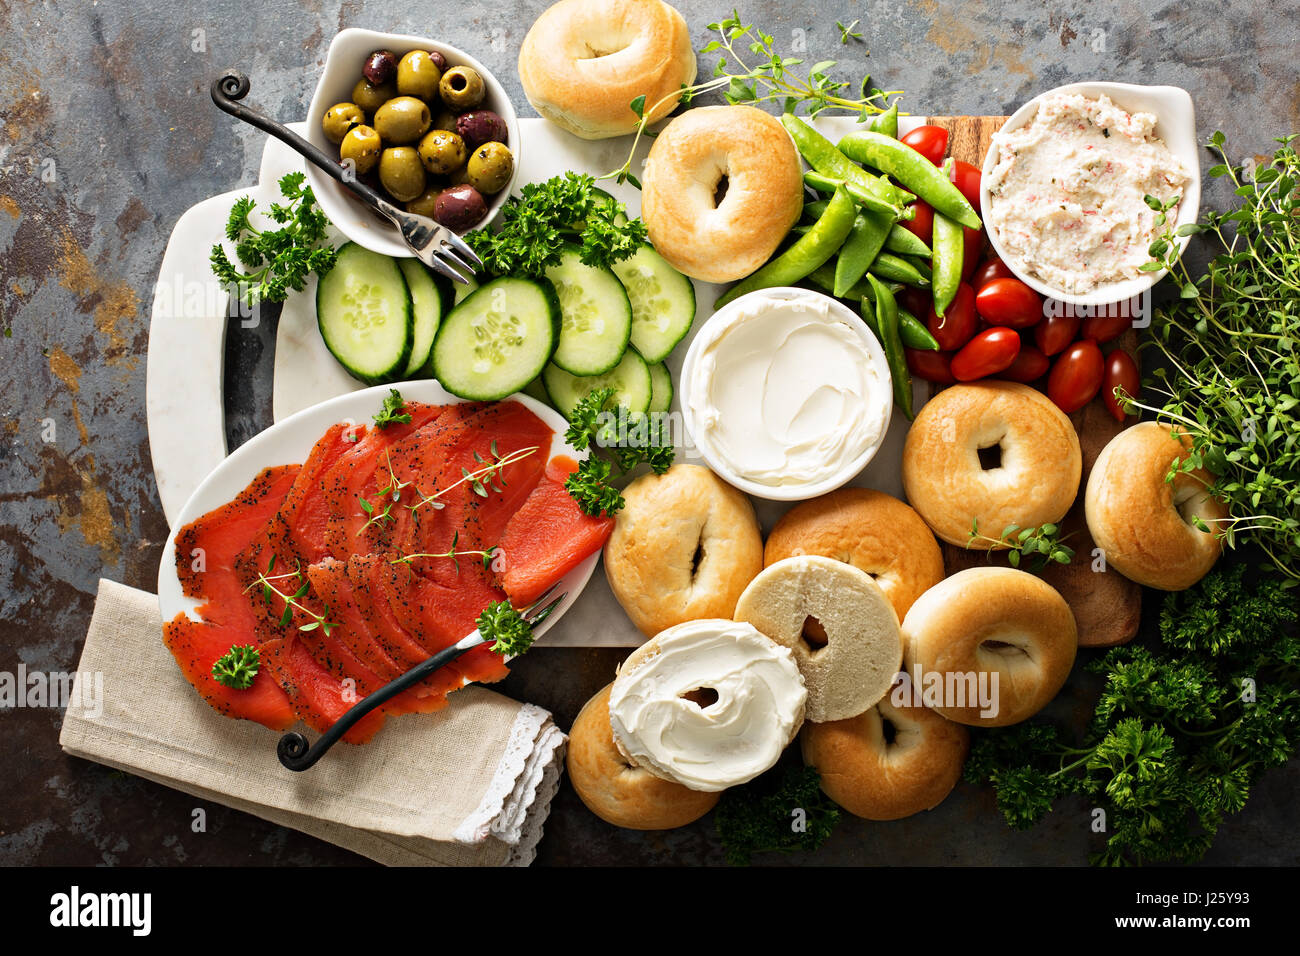 Big breakfast platter with cream cheese, bagels, smoked salmon and vegetables Stock Photo